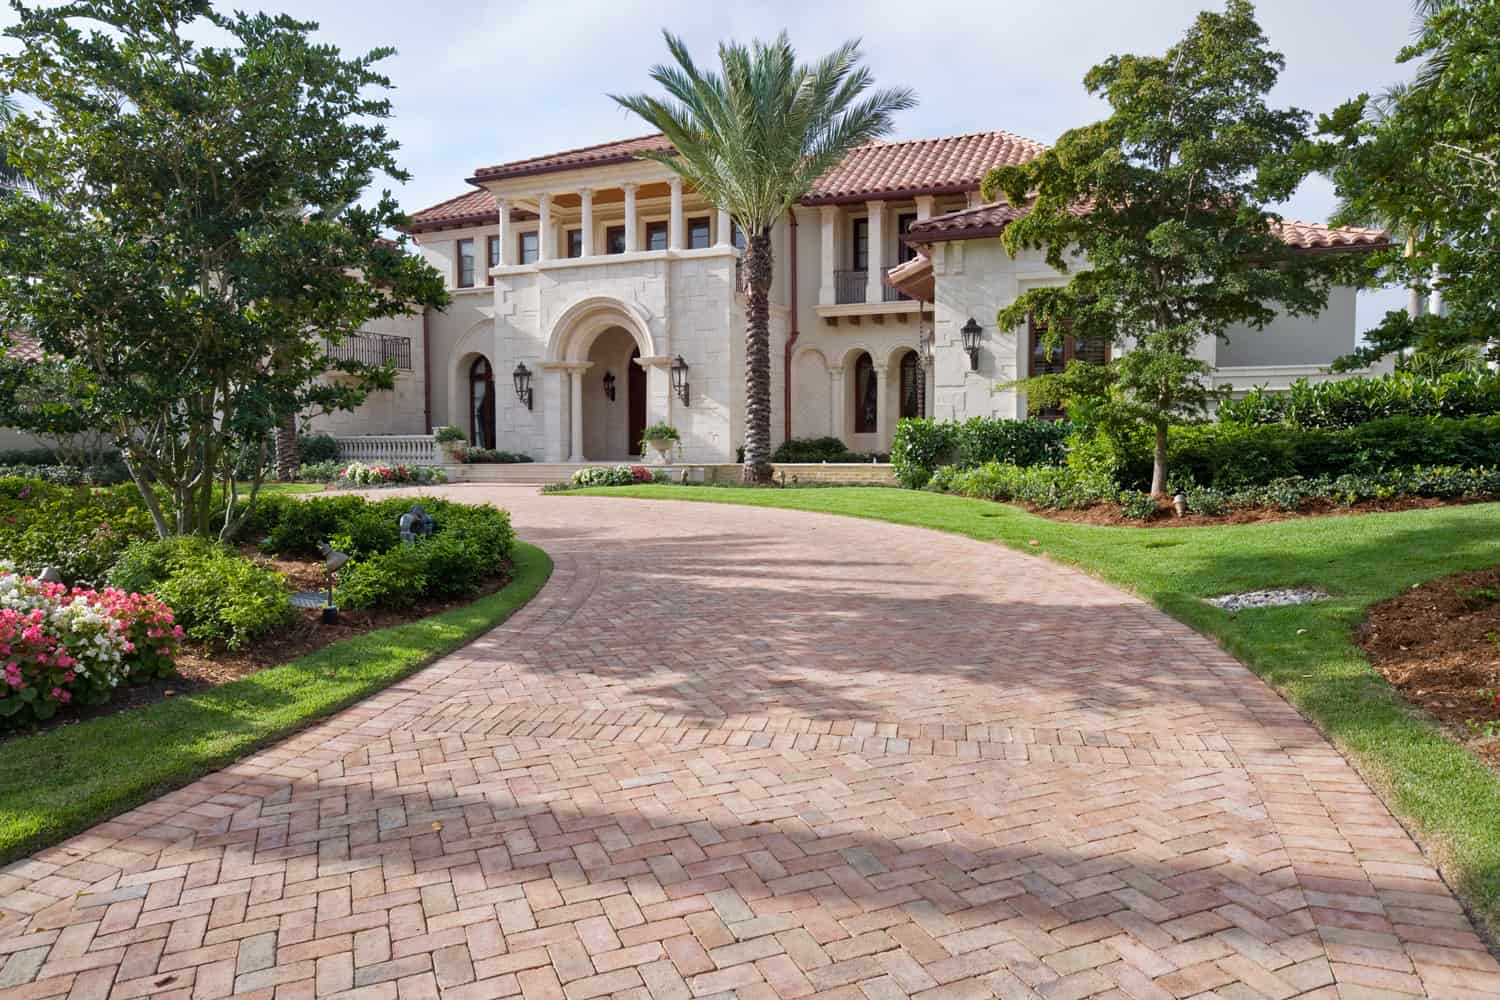 Brick pavers leading up to this beautiful estate home in Florida.